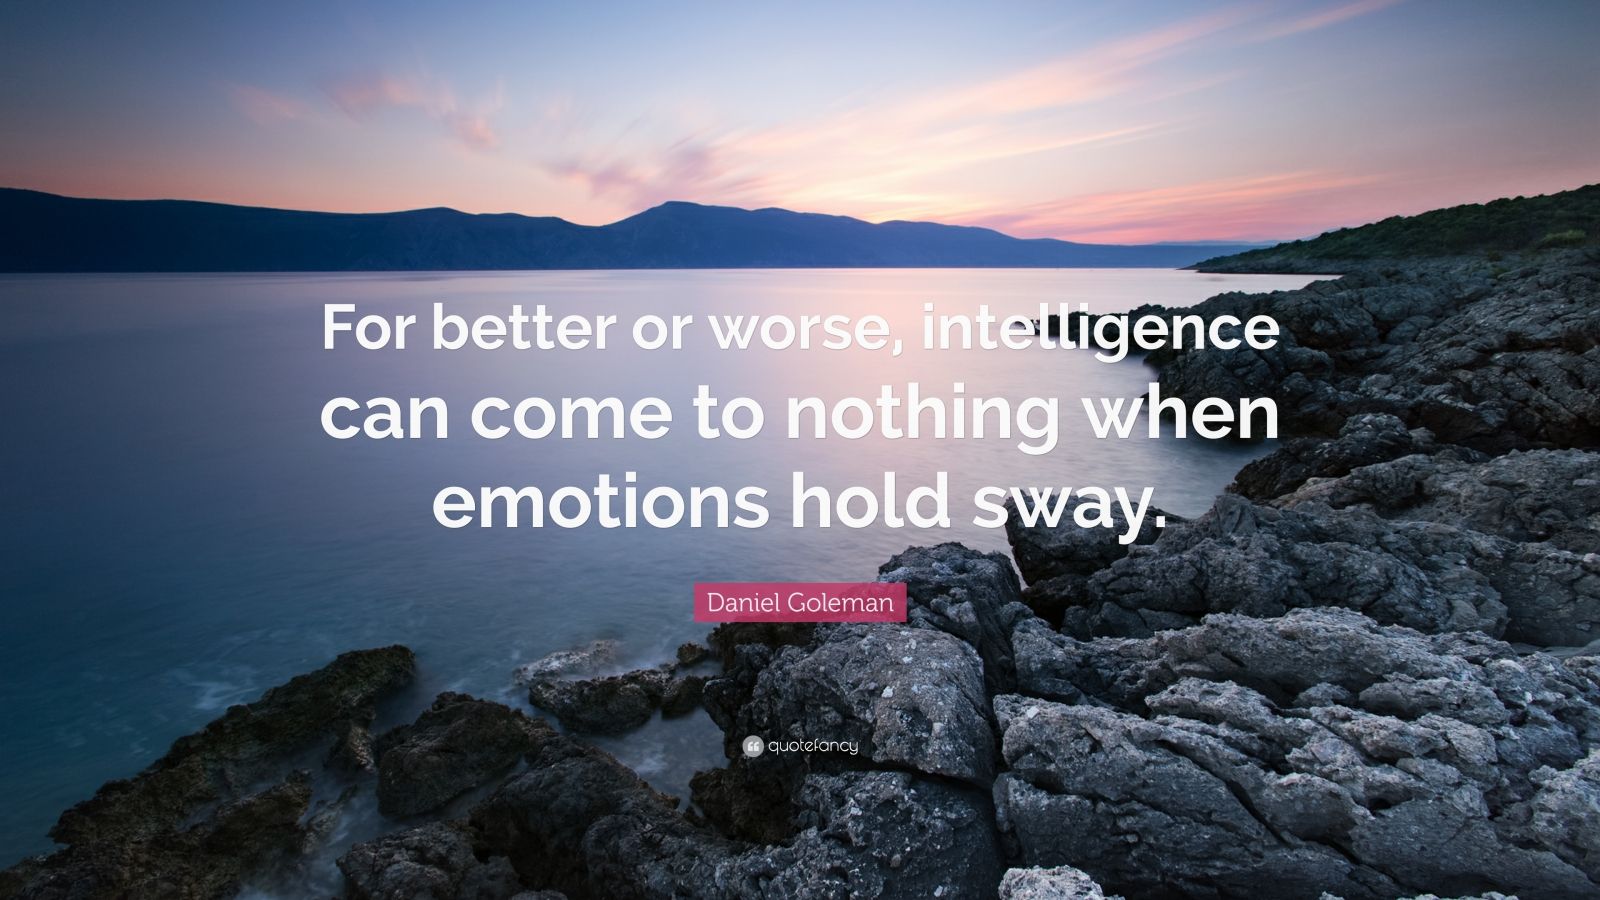 Daniel Goleman Quote “For better or worse, intelligence